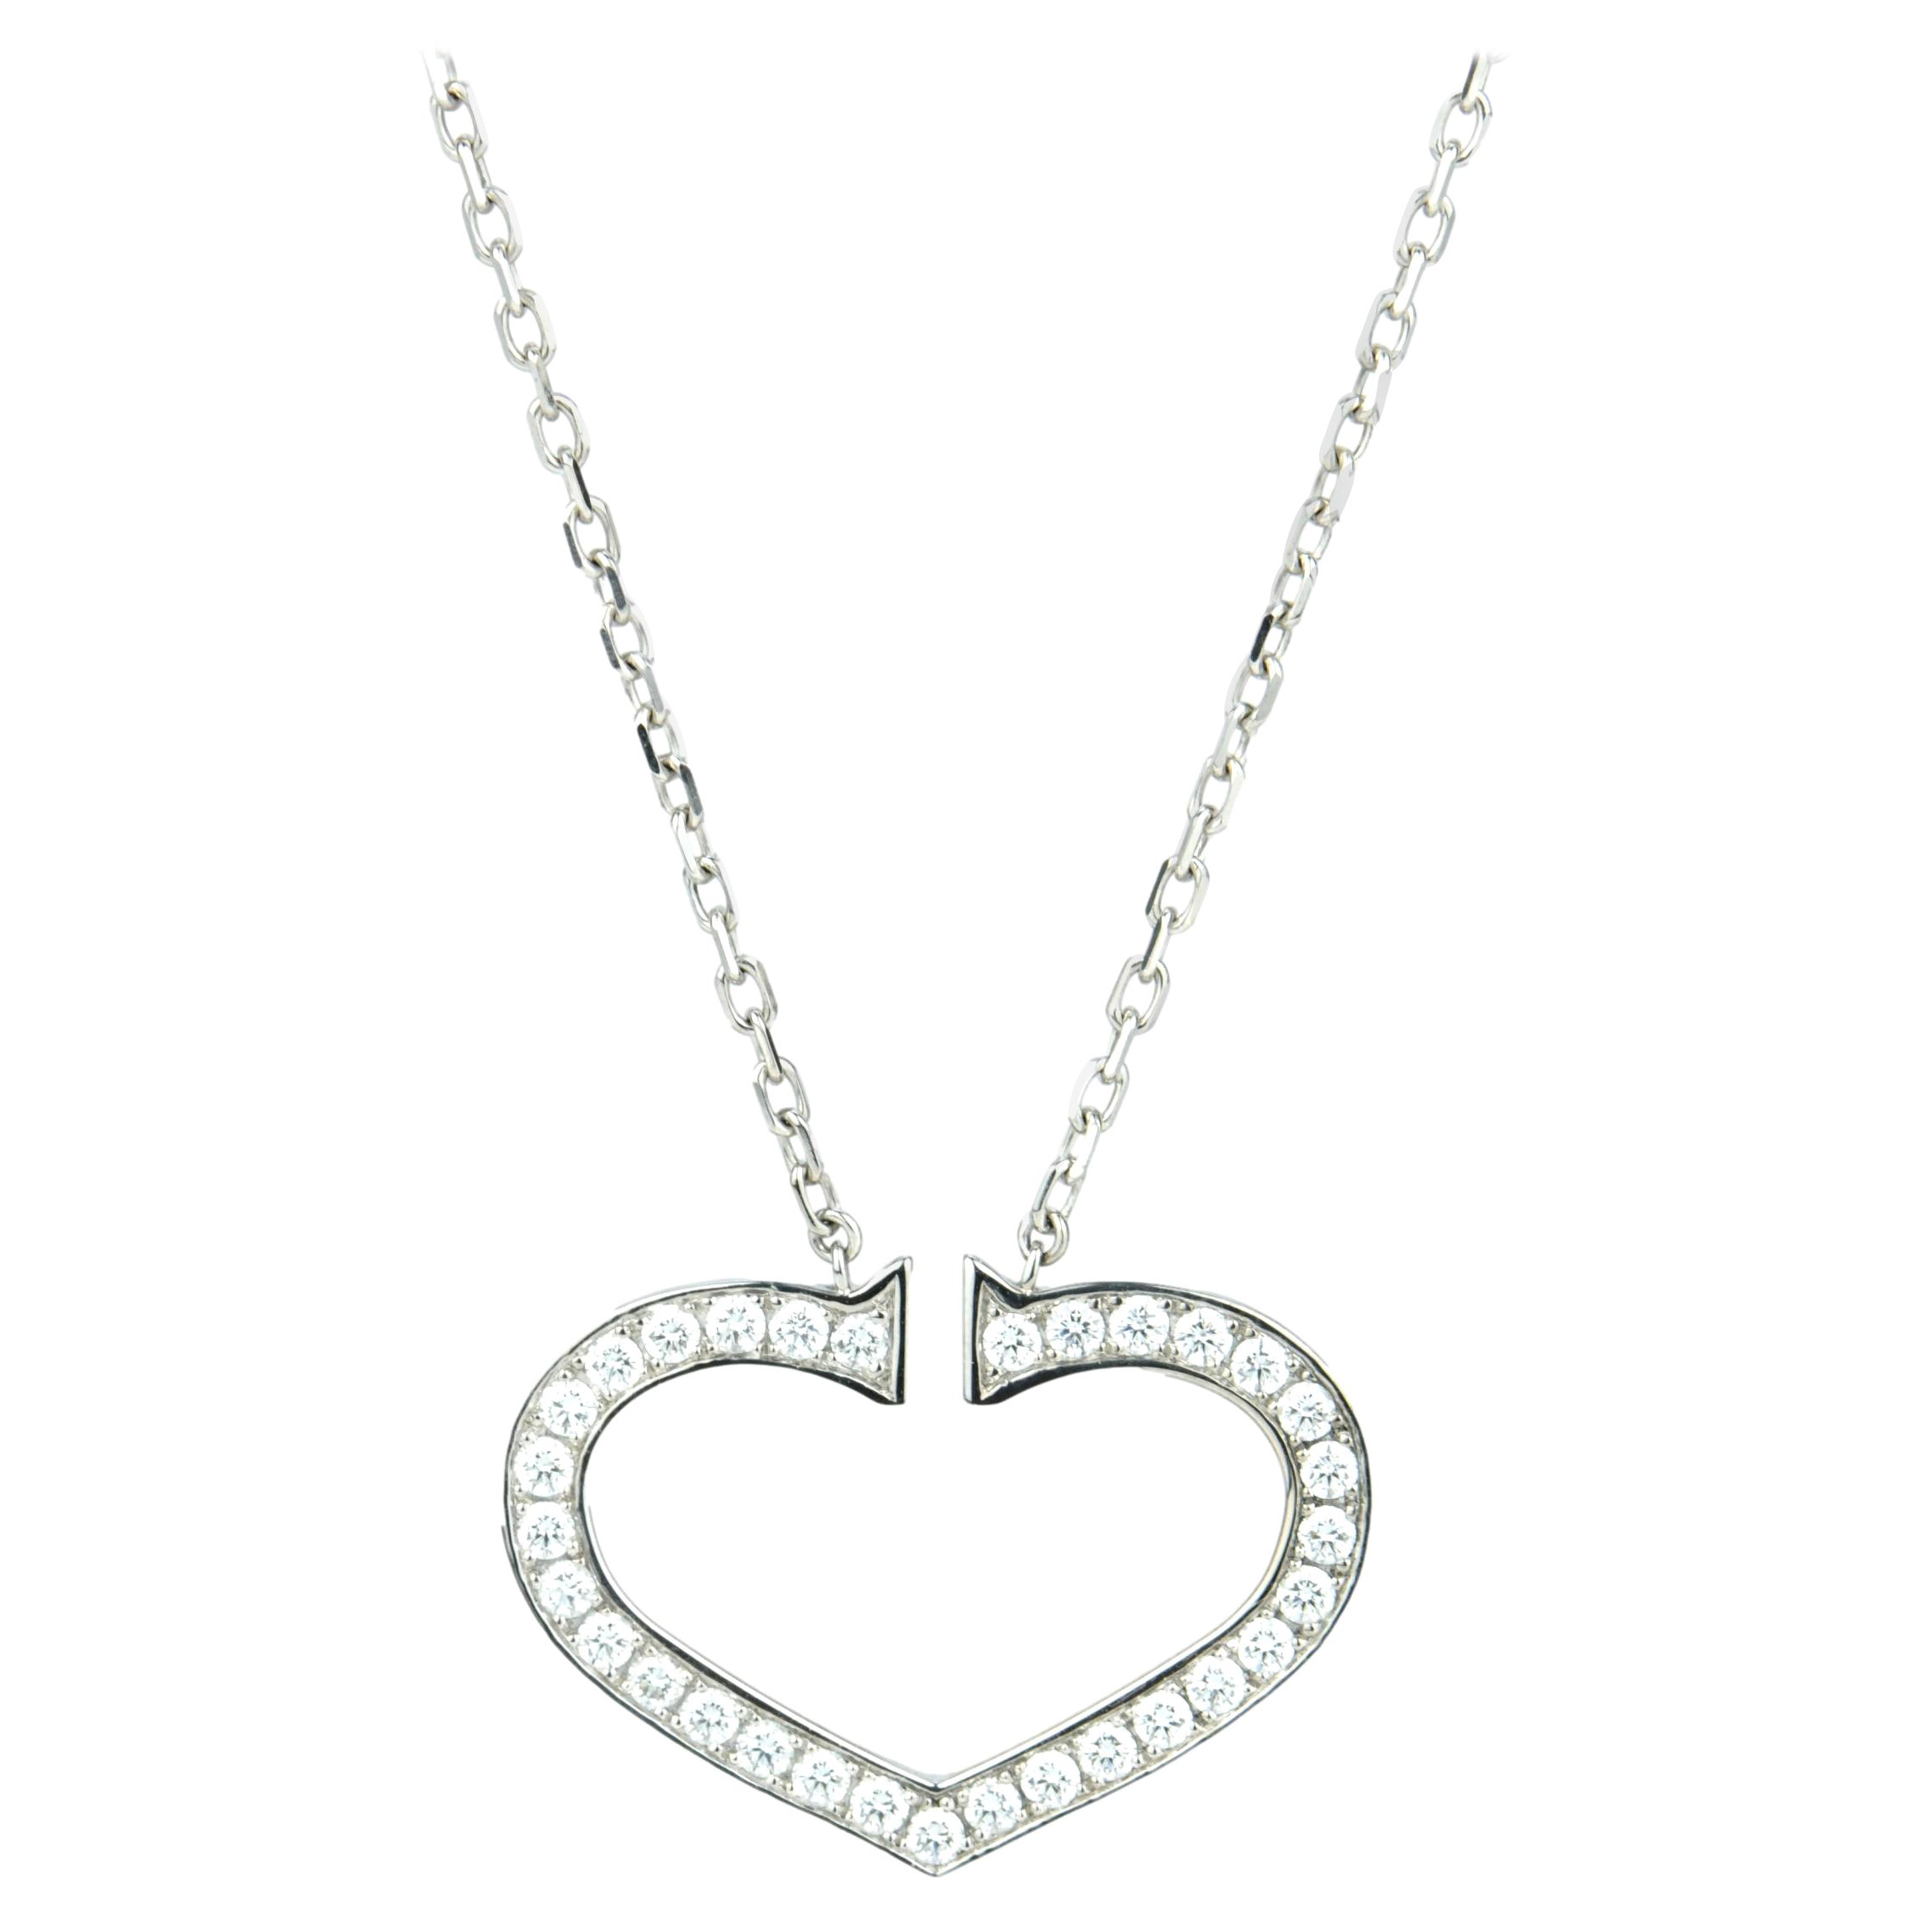 Cartier Hearts and Symbols Large Diamond 18k White Gold Pendant Necklace